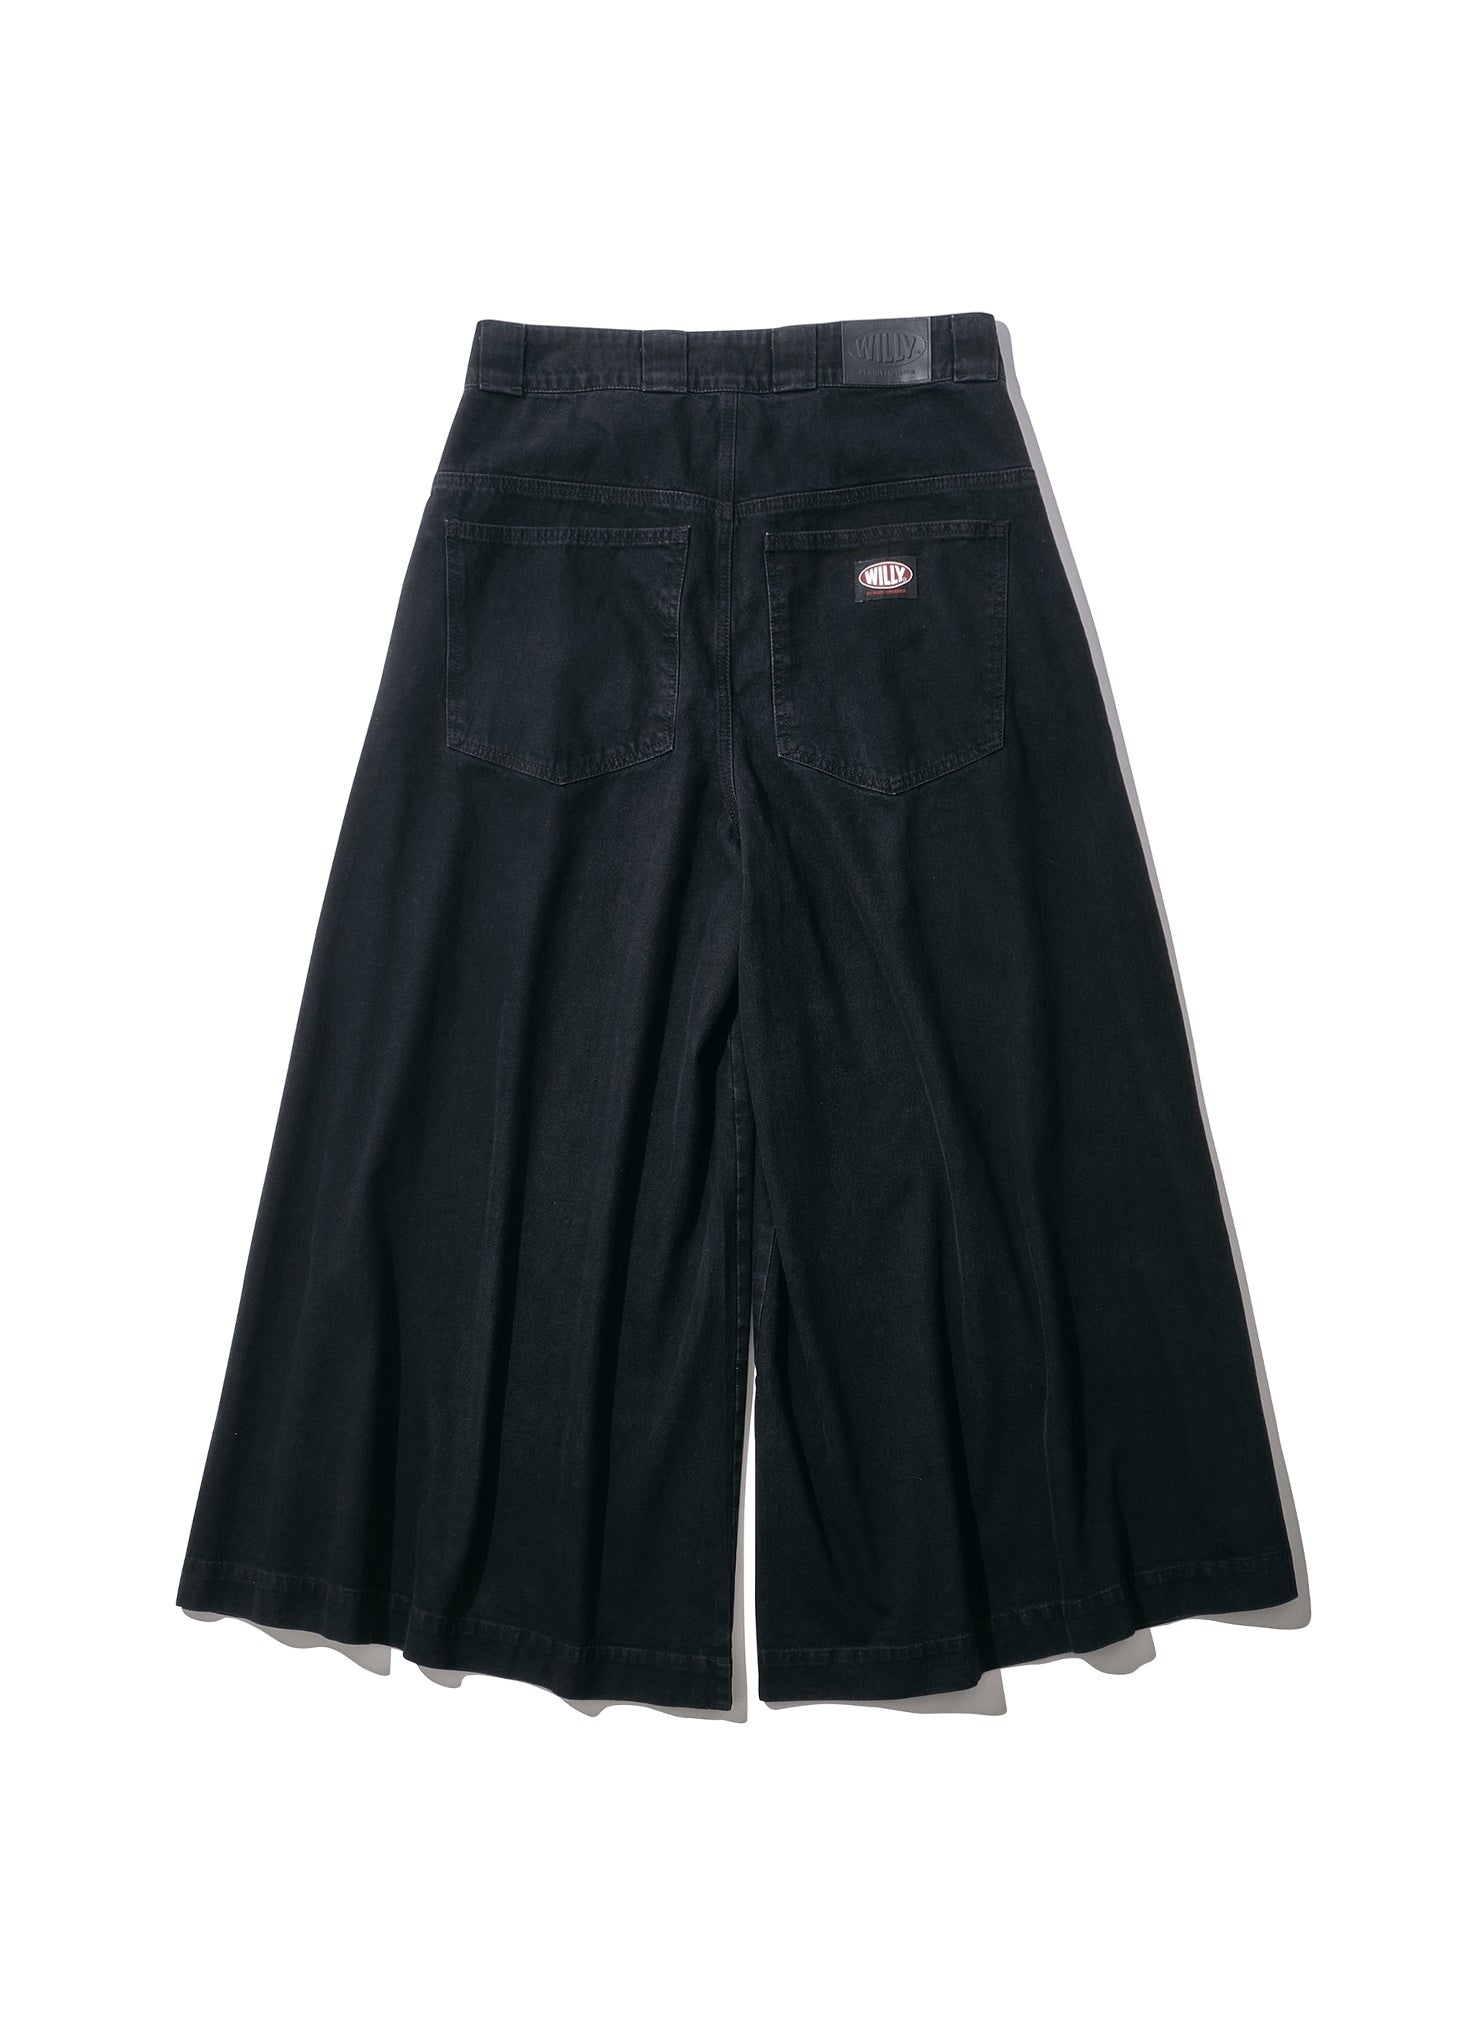 <span style="color: #f50b0b;">Last One</span> WILLY CHAVARRIA / GHOST RIDER PANT WASHED BLACK